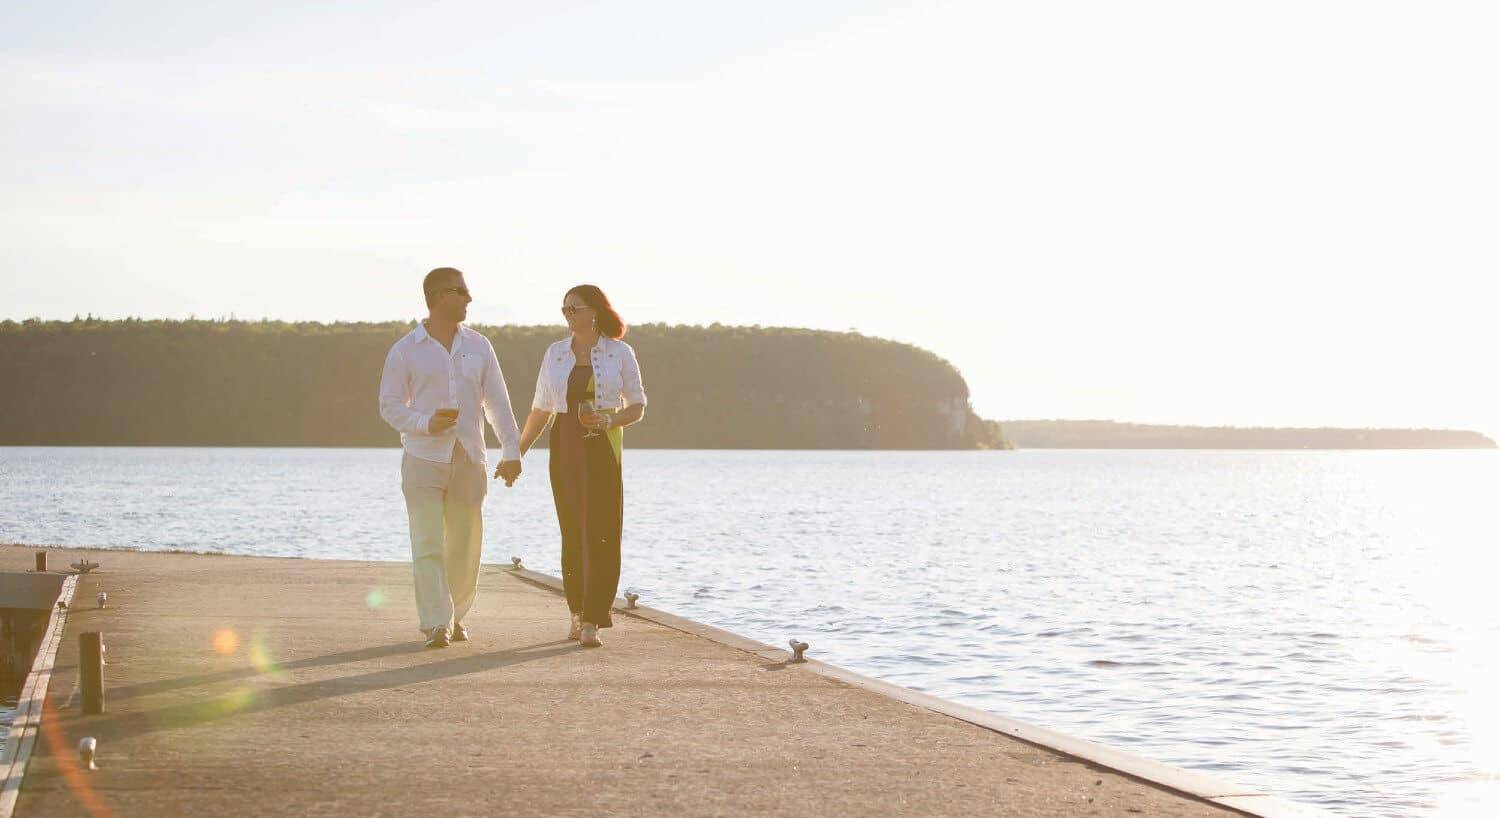 A man and woman holding hands walking down a paved walkway near a lake